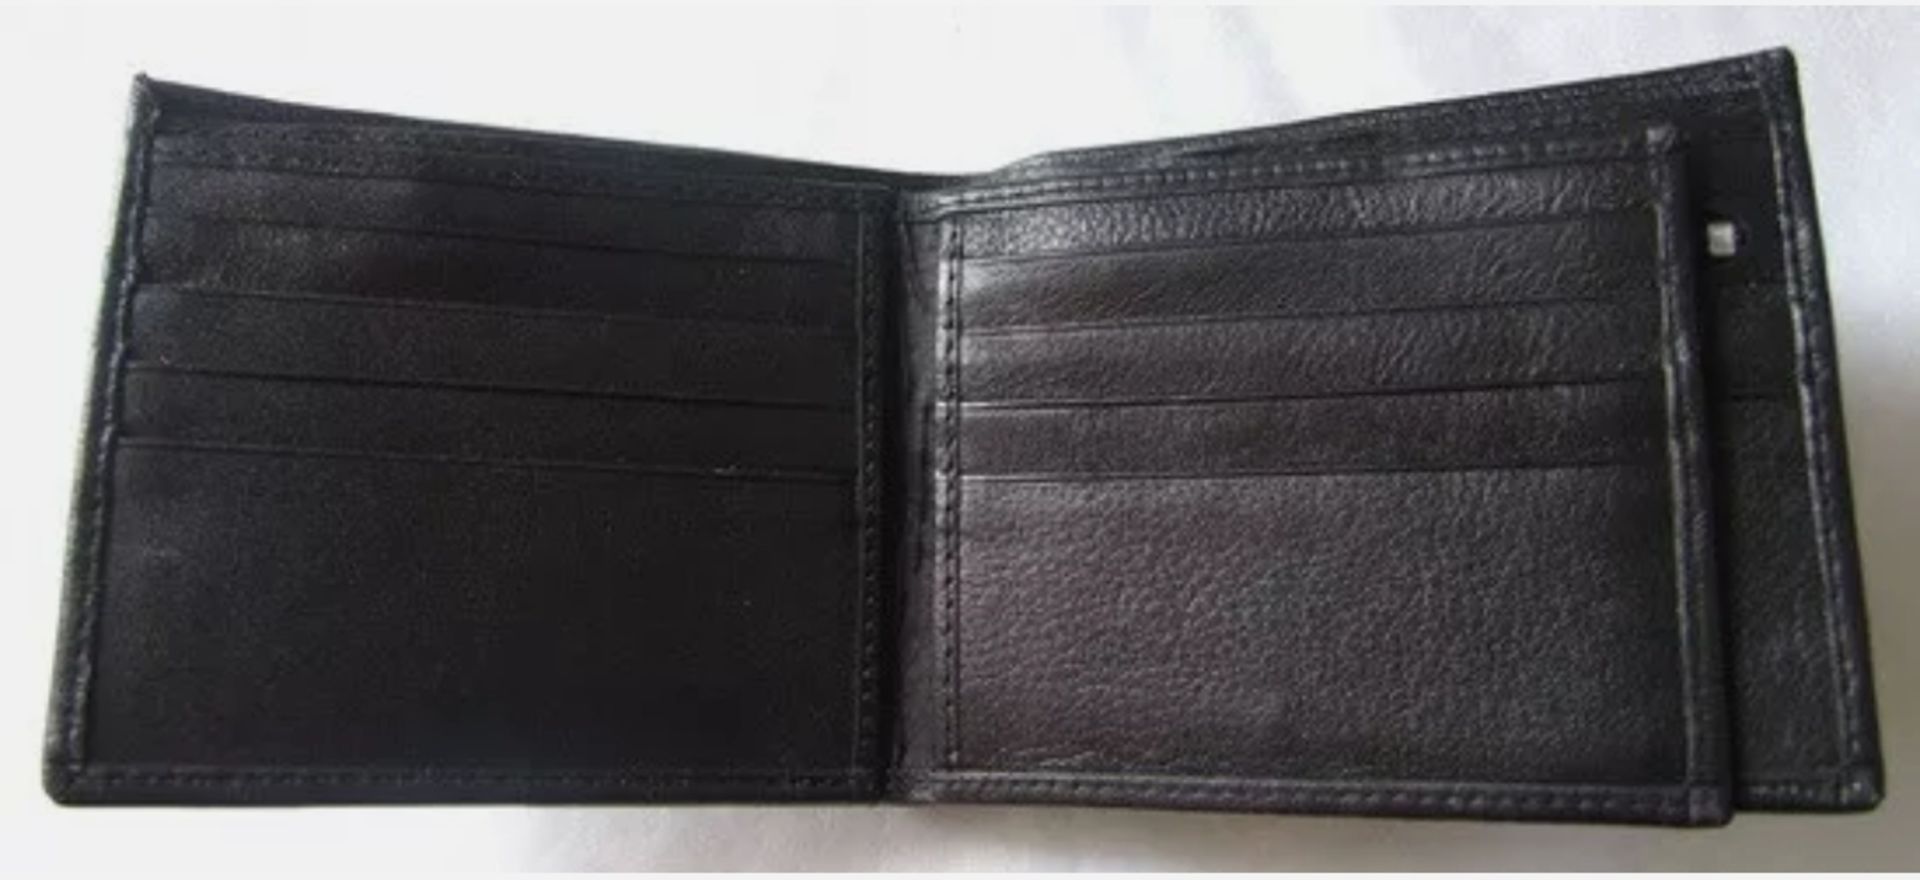 Emporio Armani Men's Leather Wallet - New With Box - Image 5 of 5